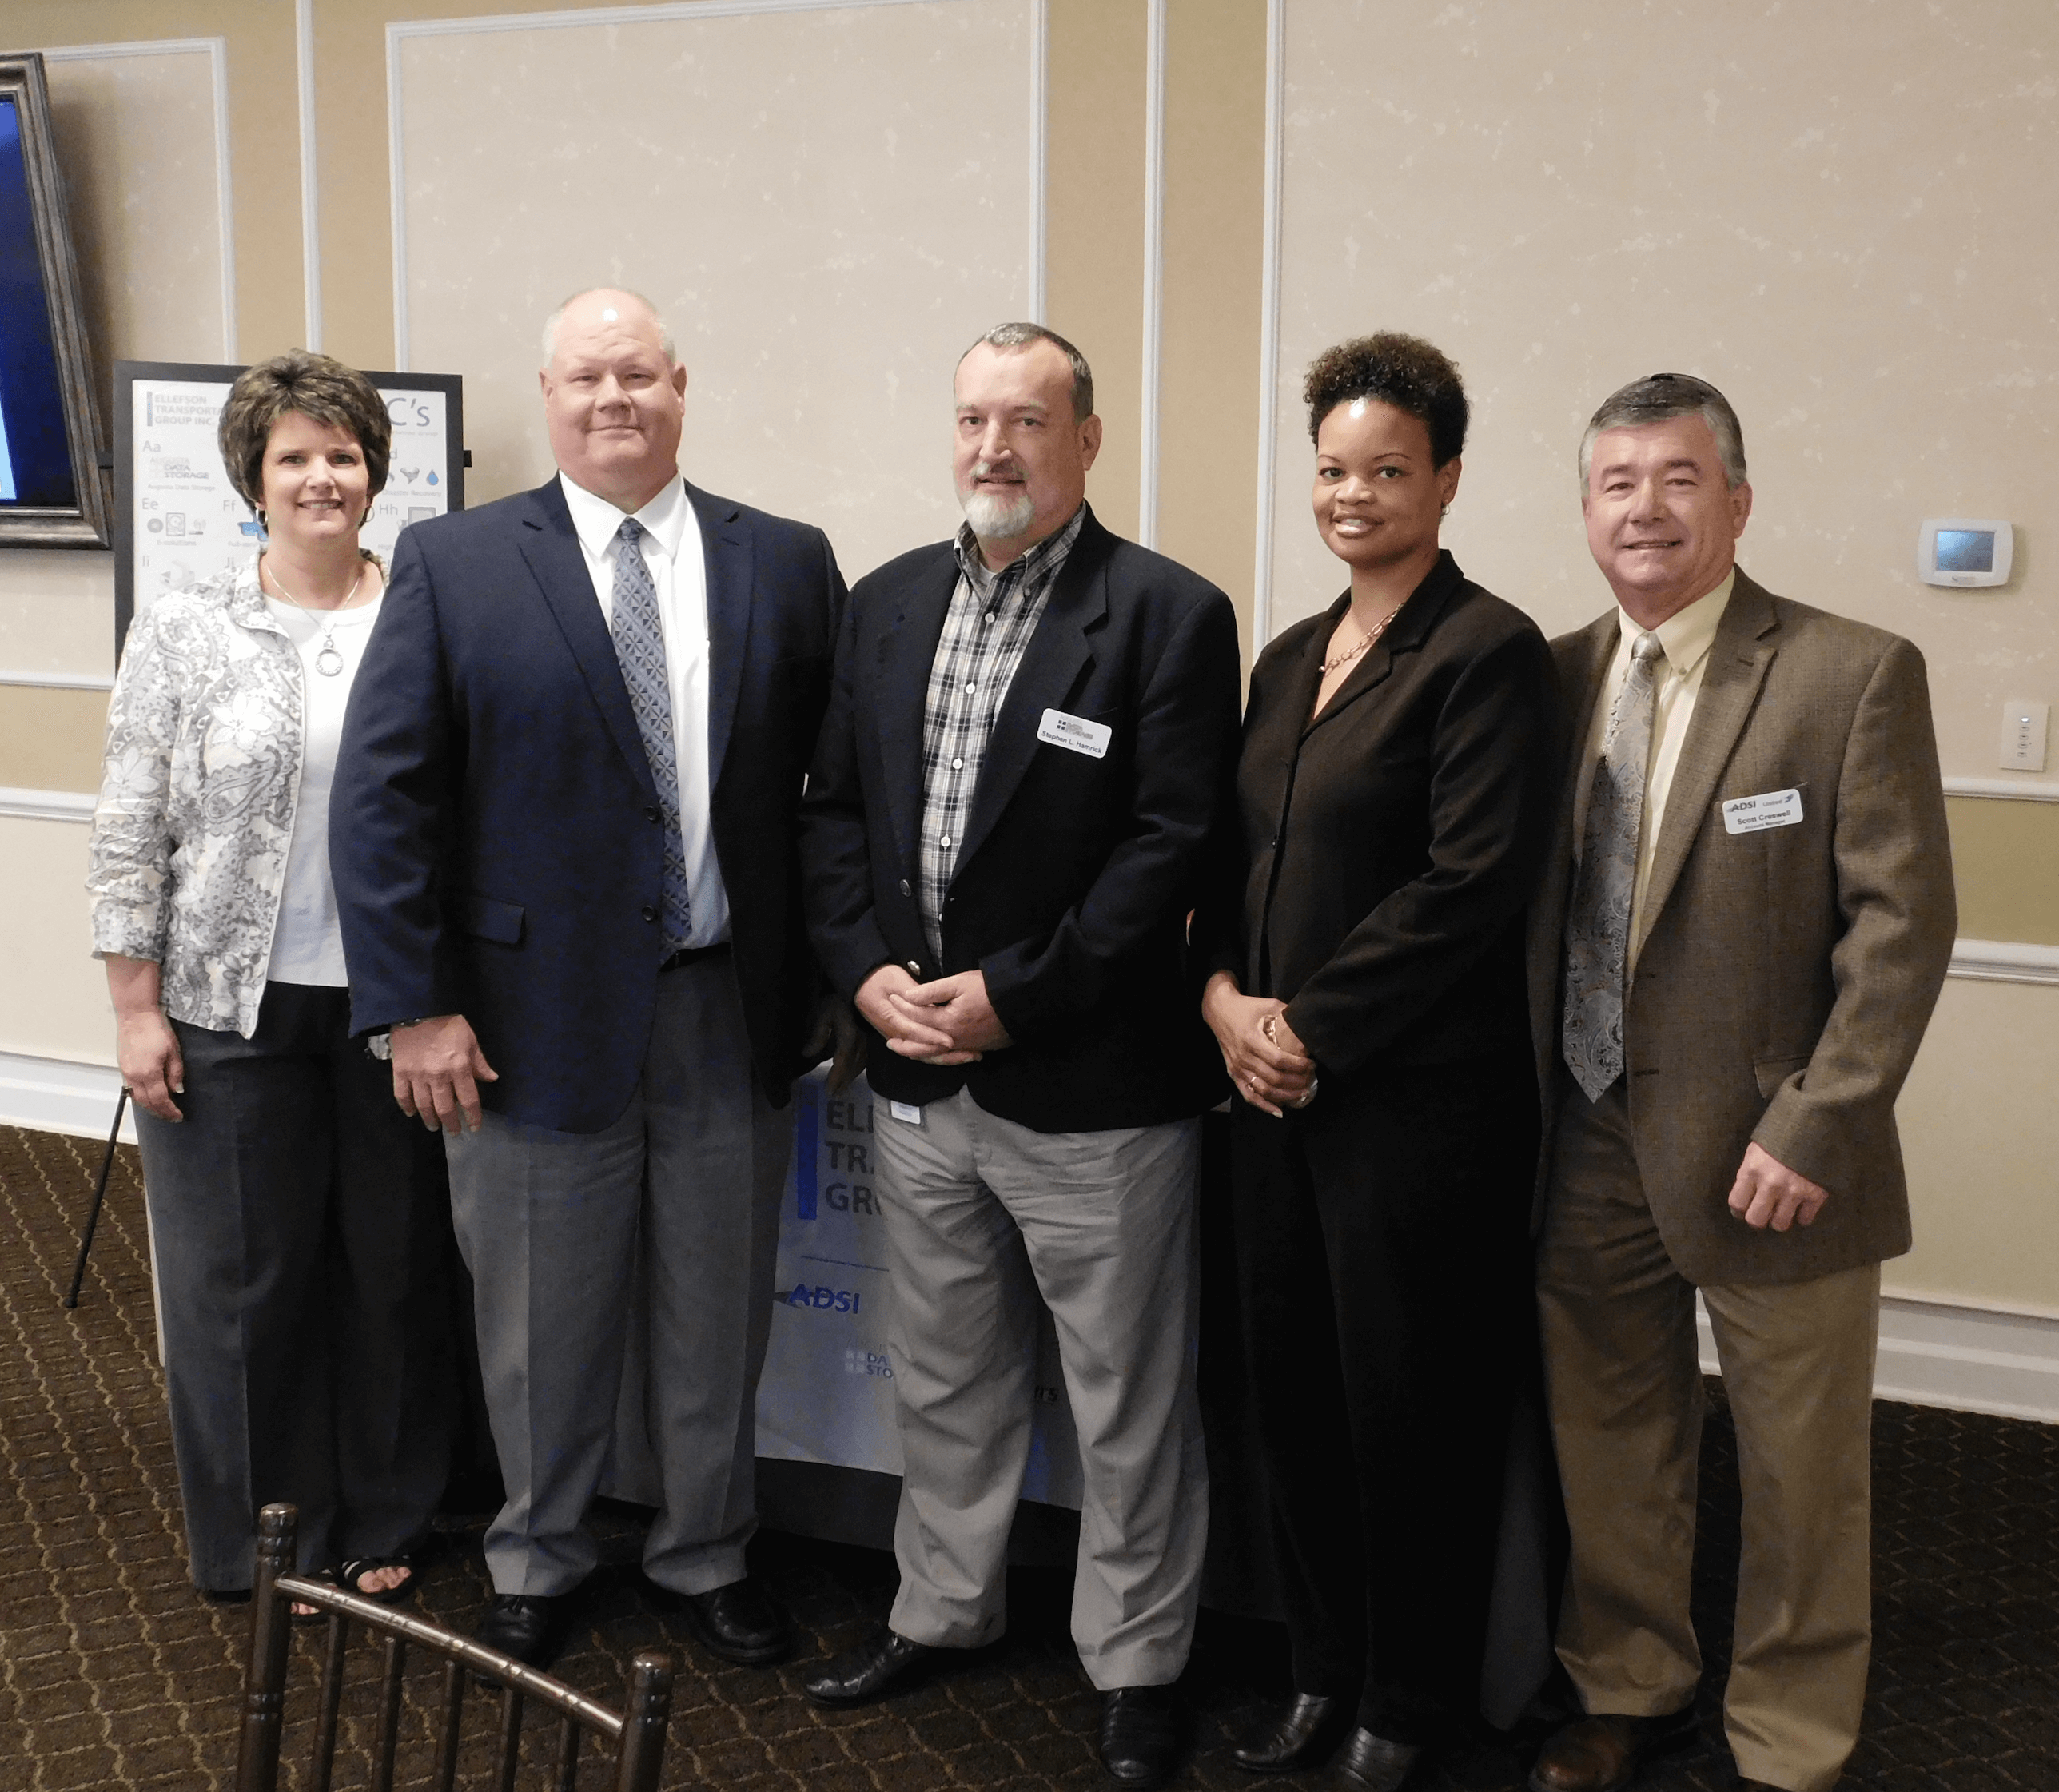 Ellefson Transportation Group sponsored this month's Women in Business Luncheon and a talk on Identity Theft Protection and Prevention. A few of our team members had the opportunity to attend the event. Pictured (LtoR): Anita Ellefson, Brian Ellefson, Stephen Hamrick, Bridgett Summerour, Scott Creswell